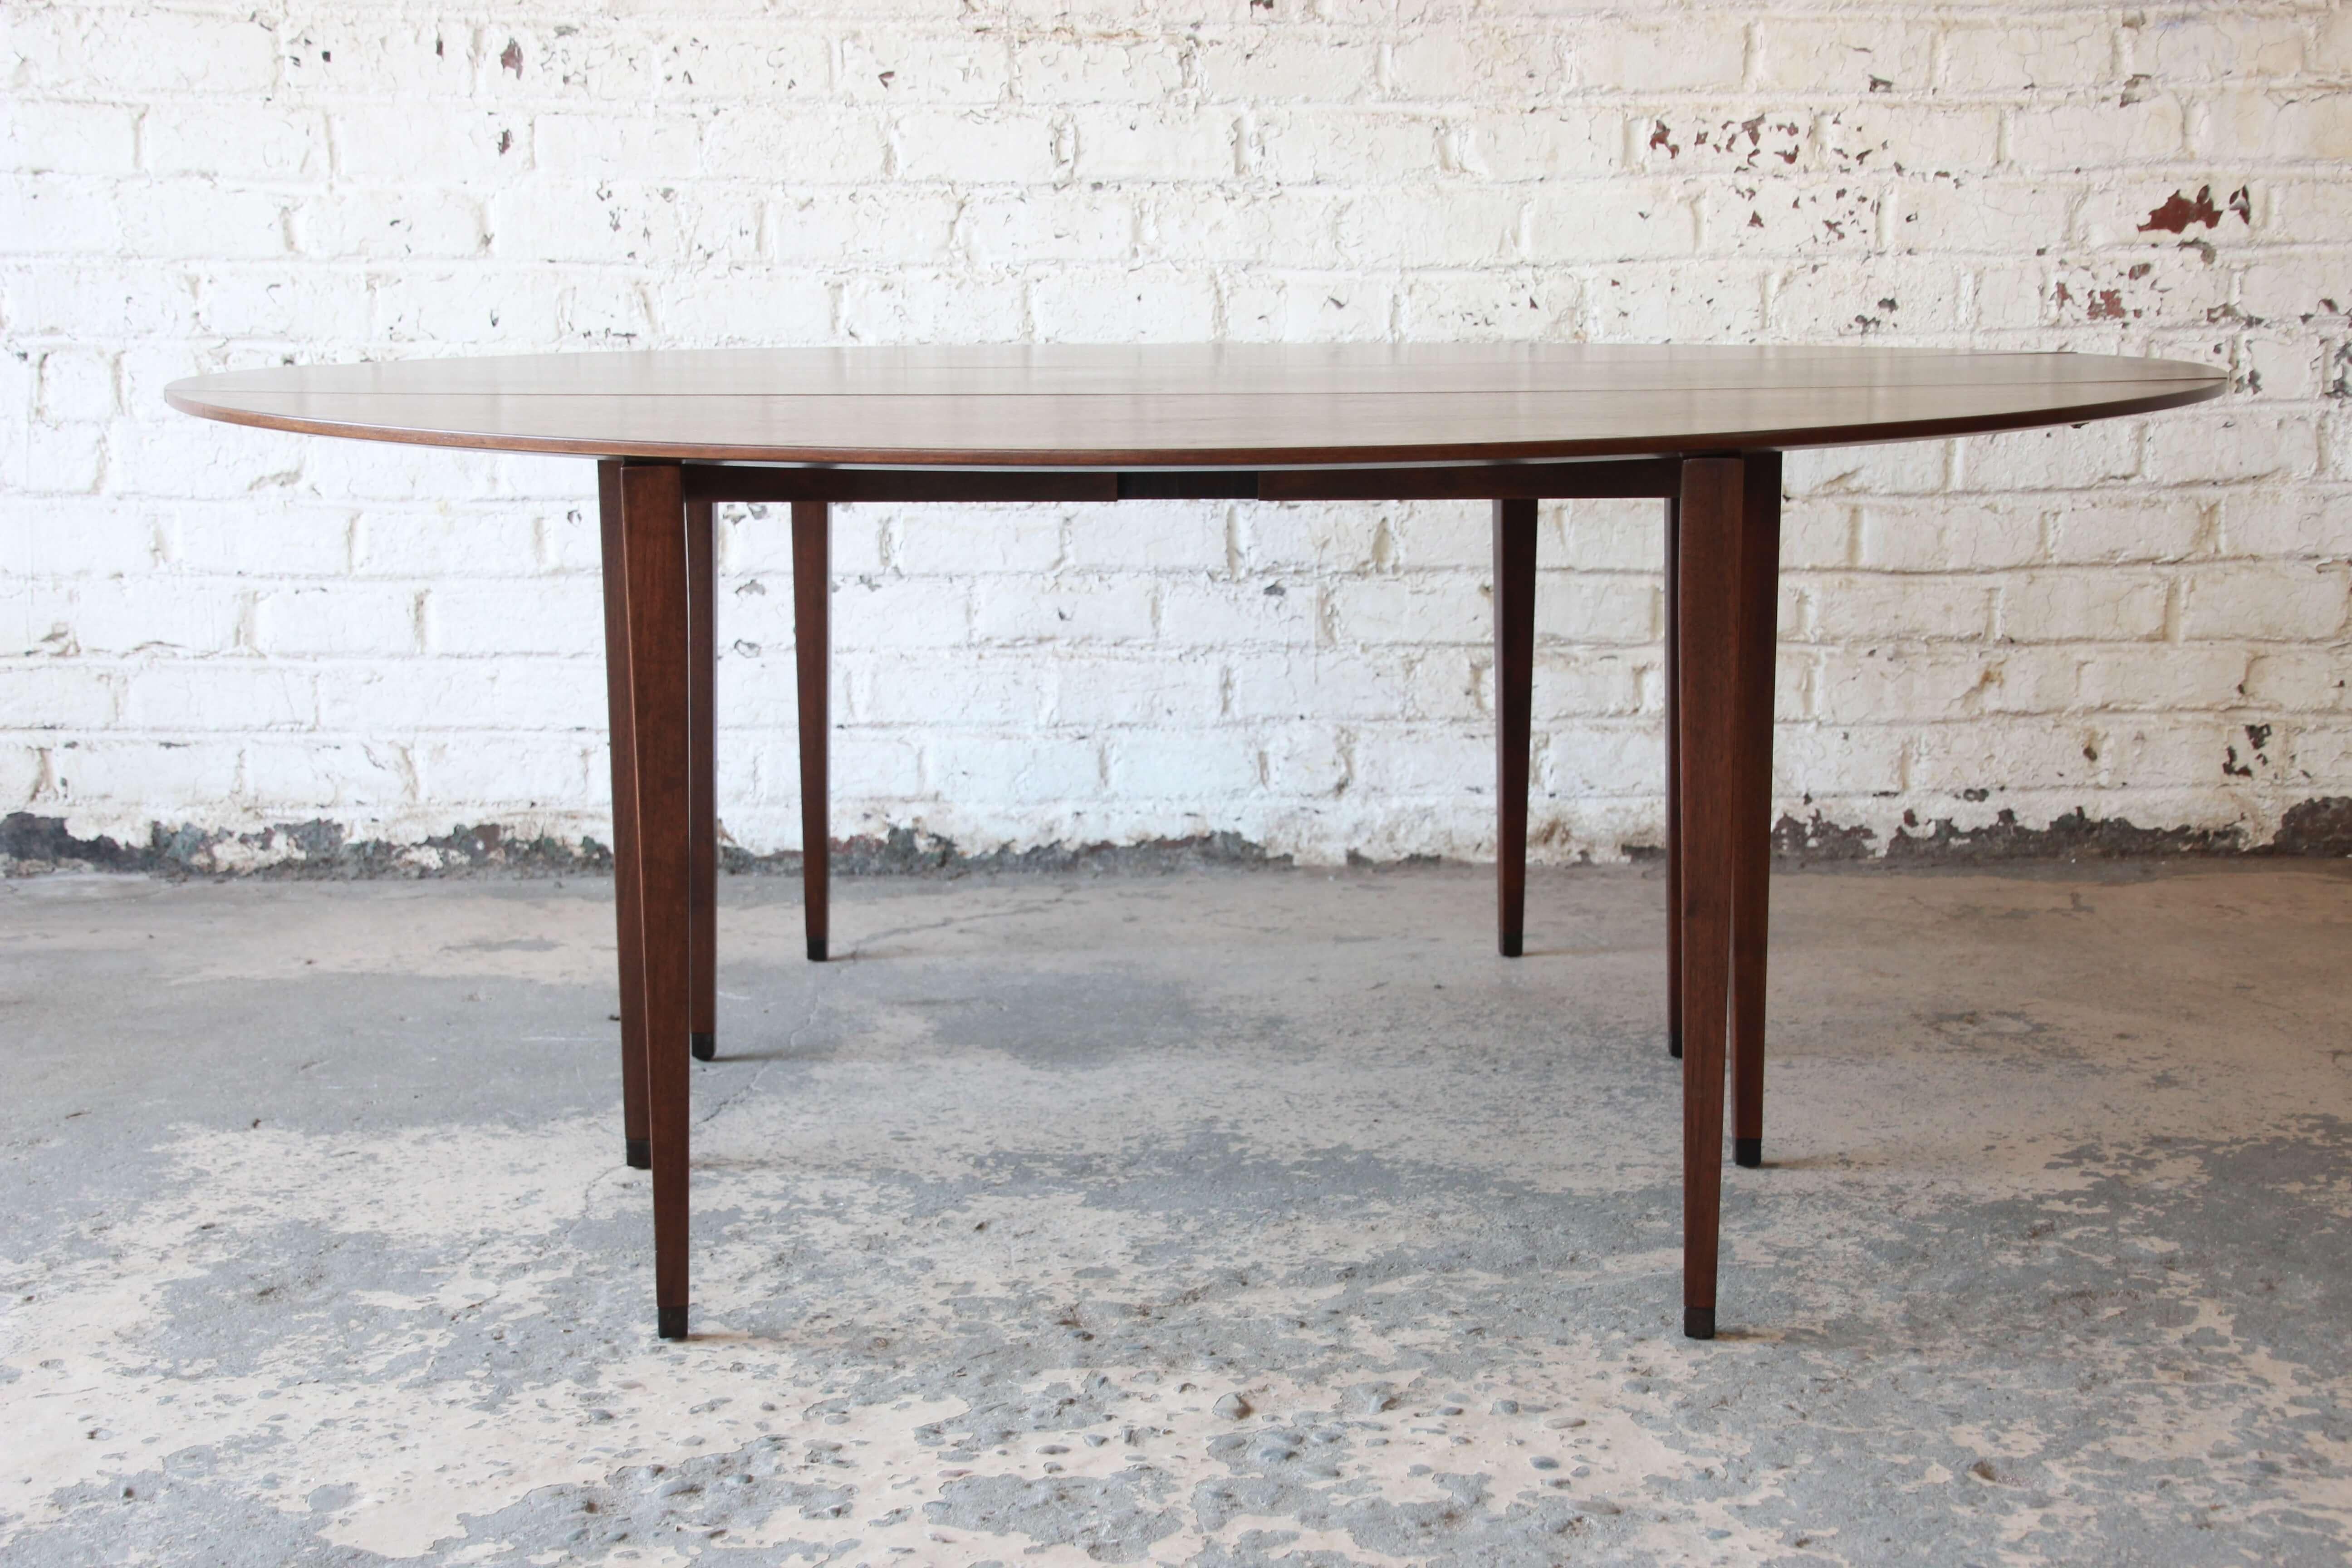 Offering a very nice Edward Wormley for Dunbar walnut oval drop-leaf dining table. The table has a beautiful bookmatched walnut wood grain. The table can be use as a nice sofa back table and then also extends to 72